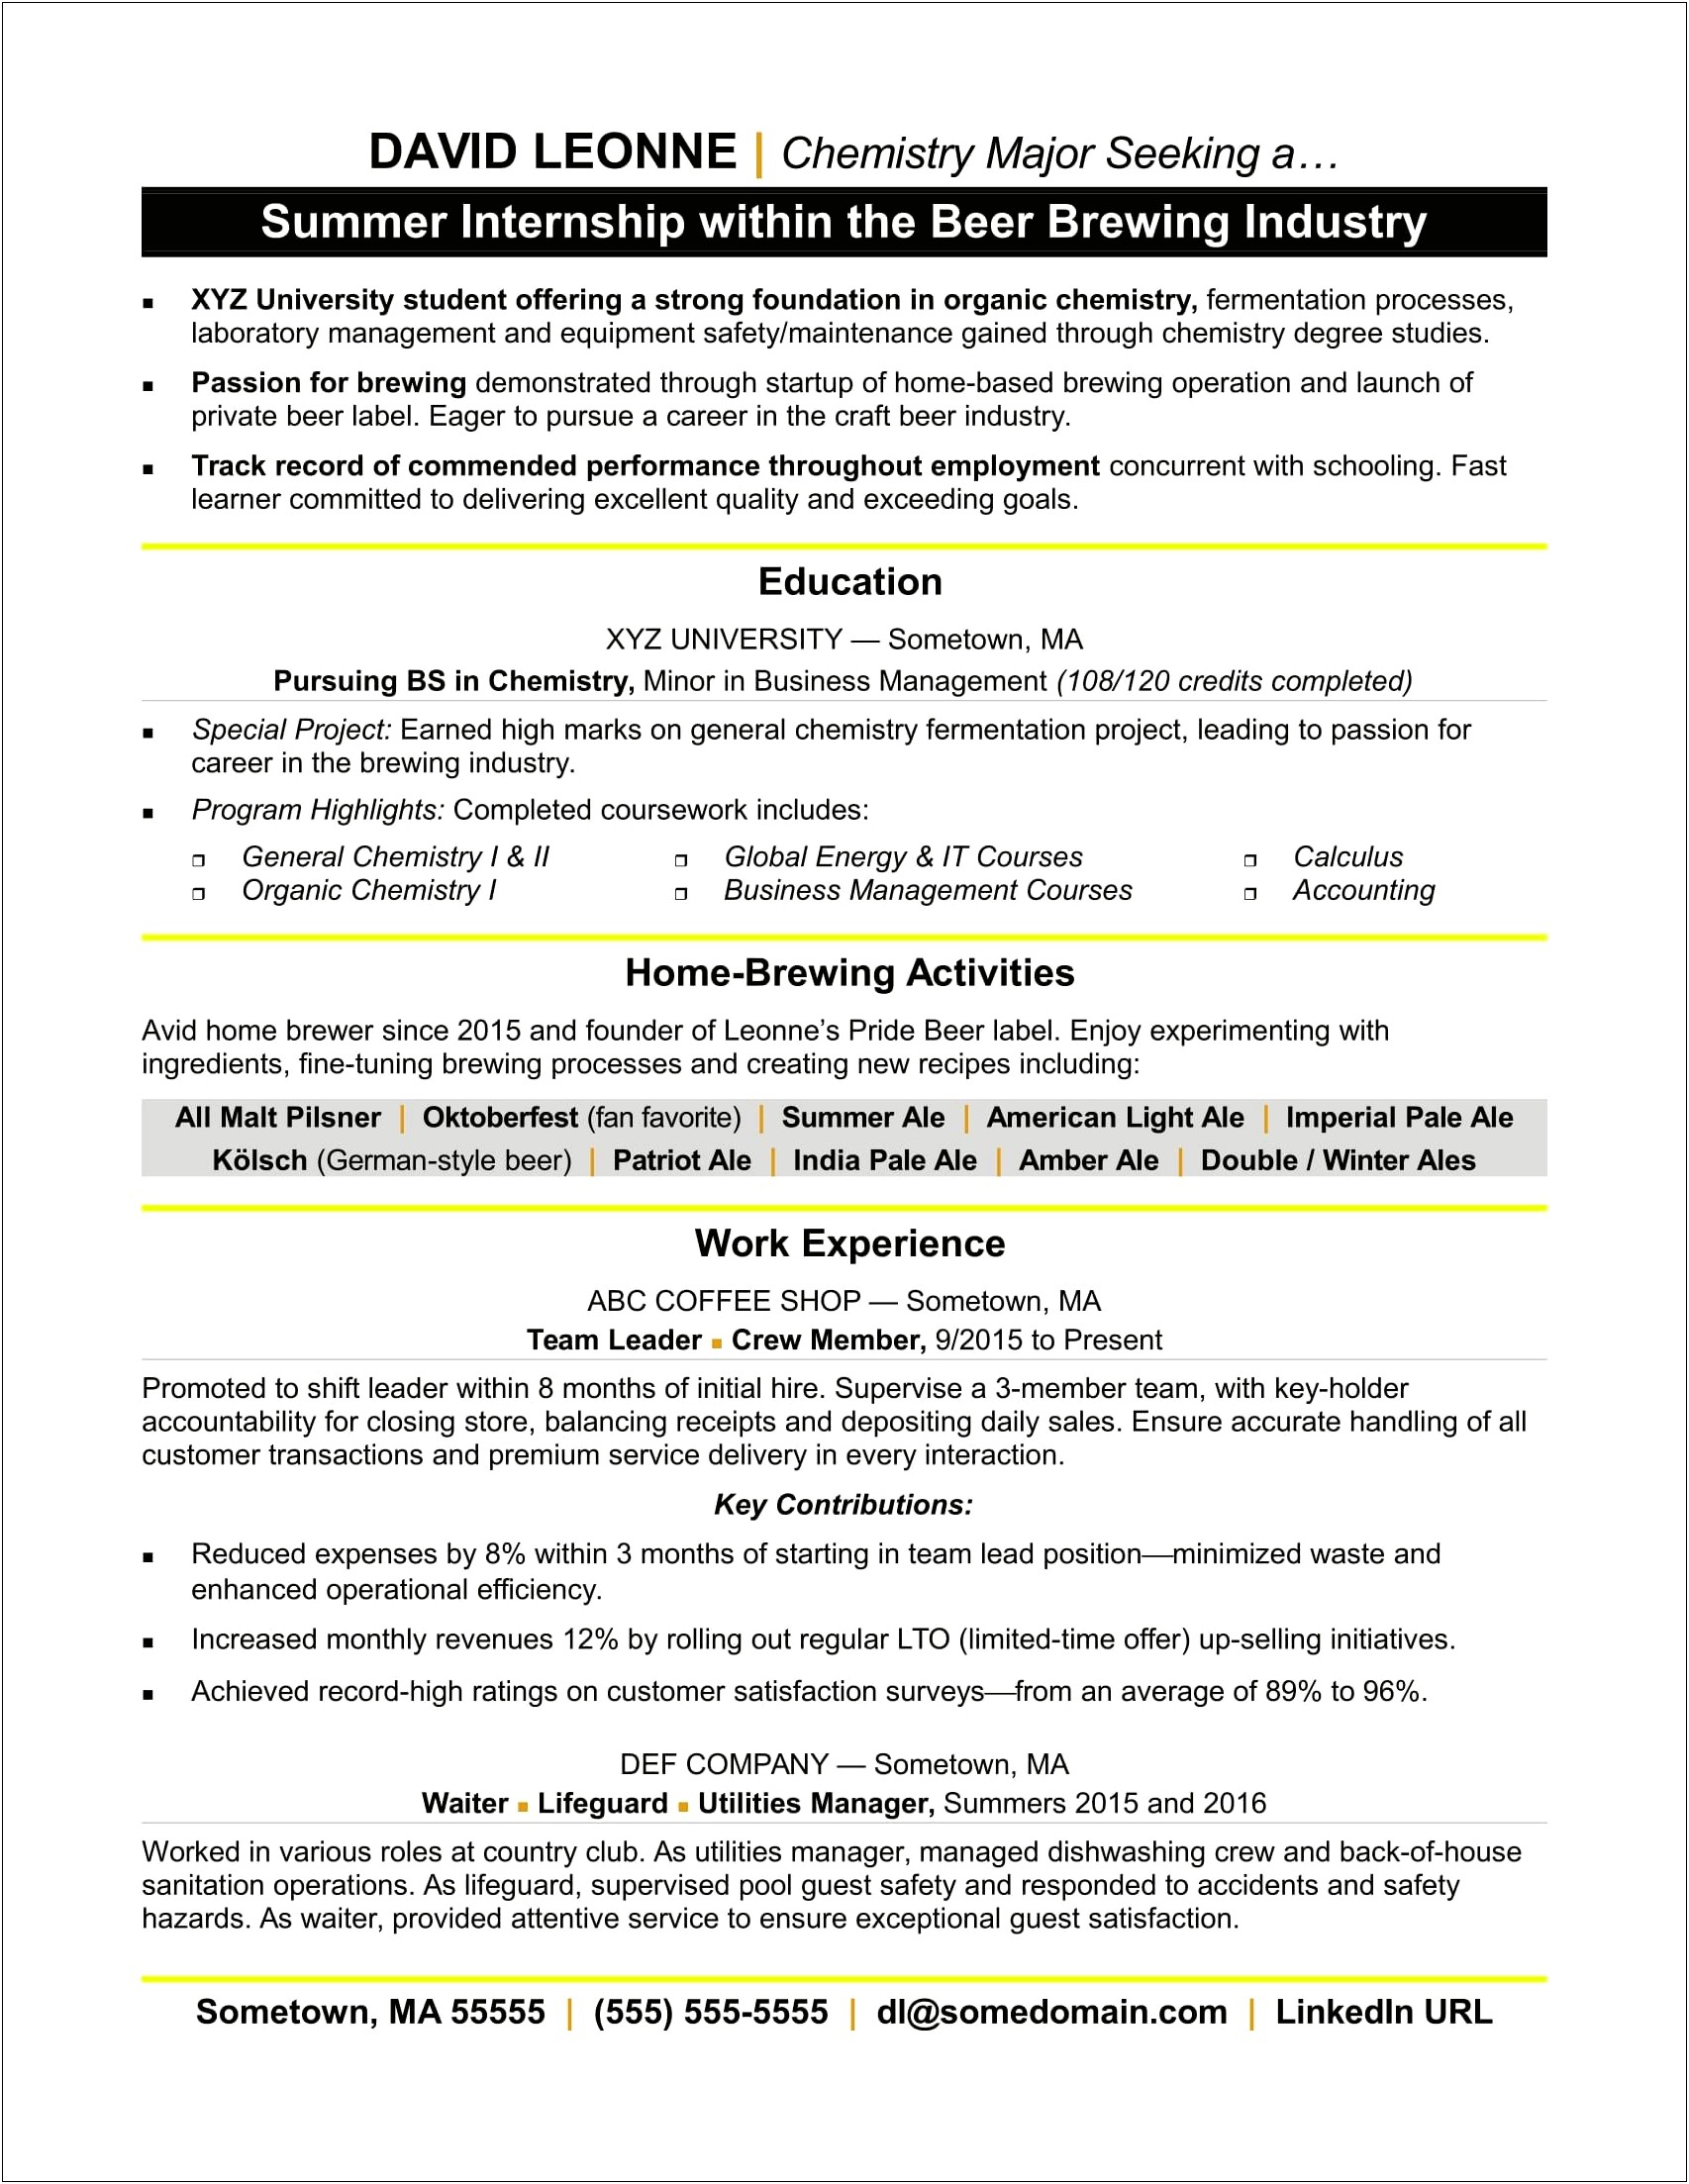 Example Of A Beer Sales Rep Resume